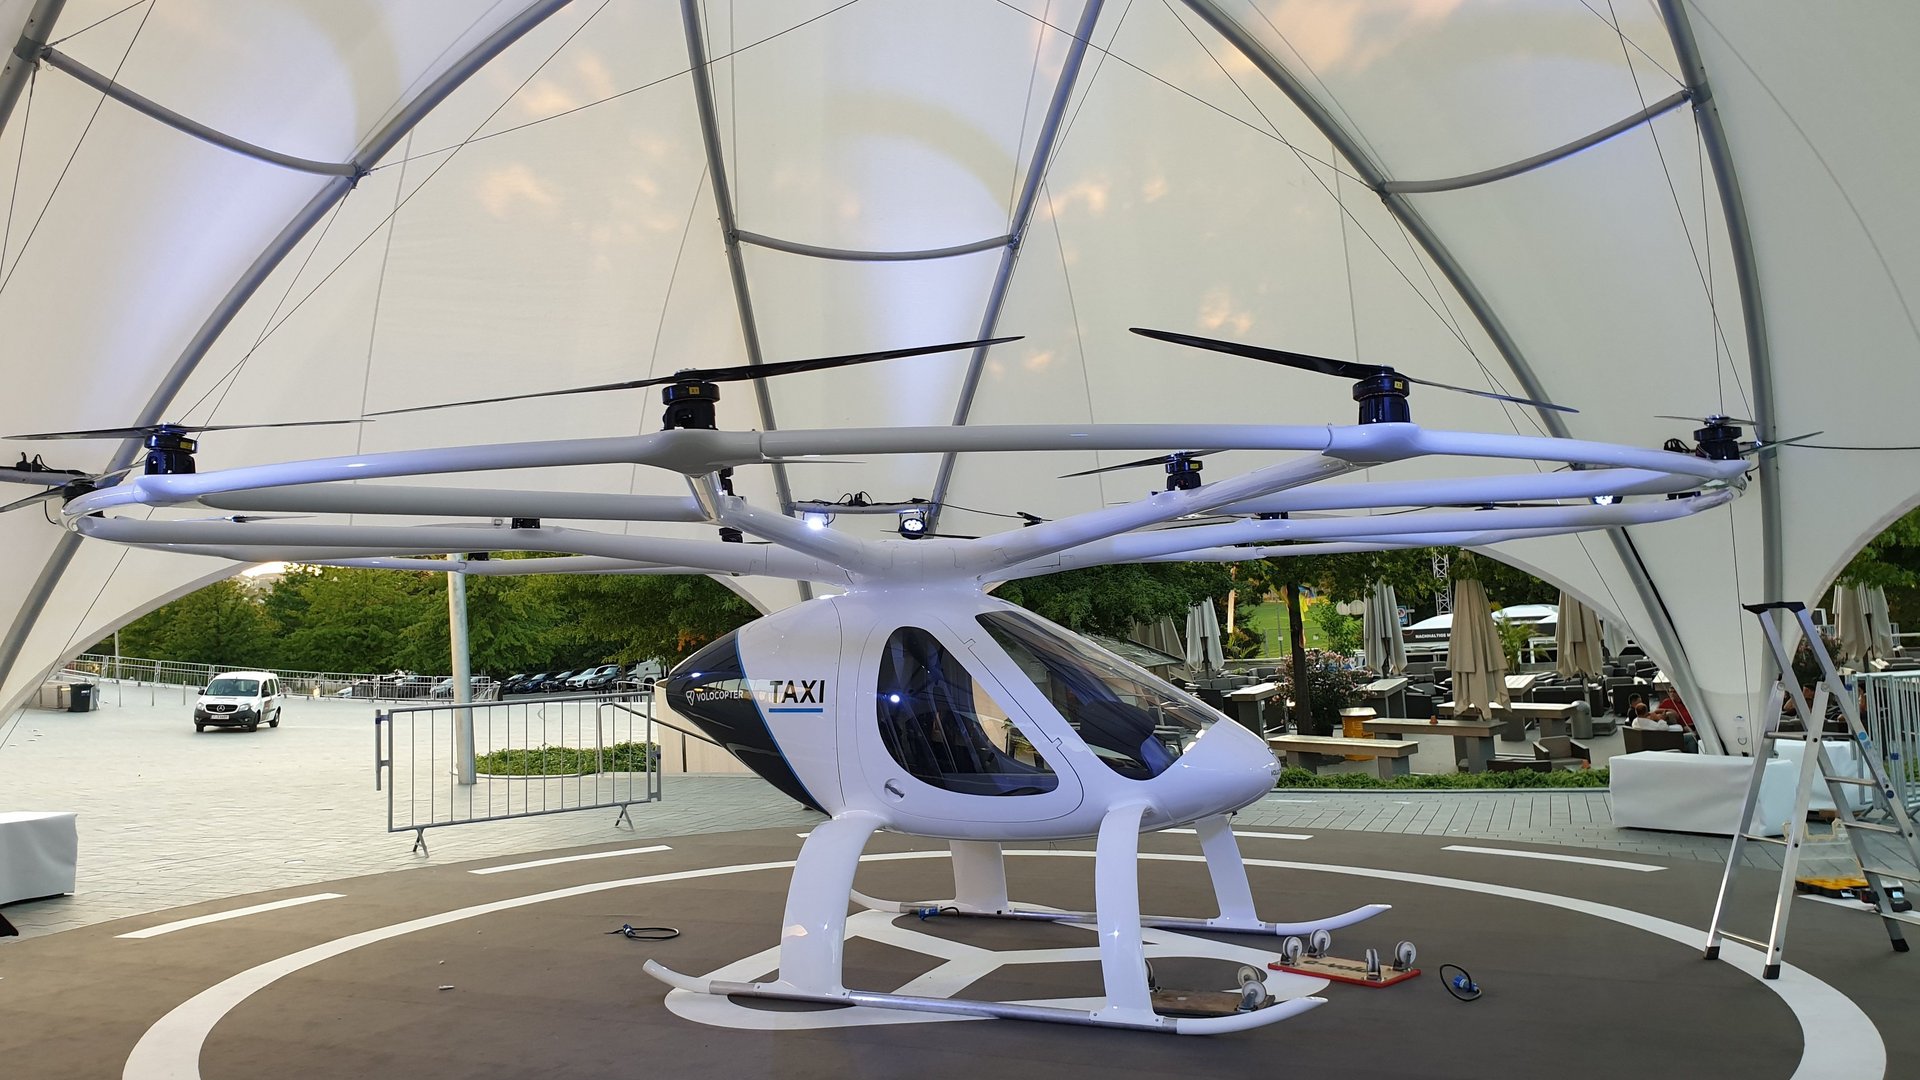 Modell des Volocopter 2X